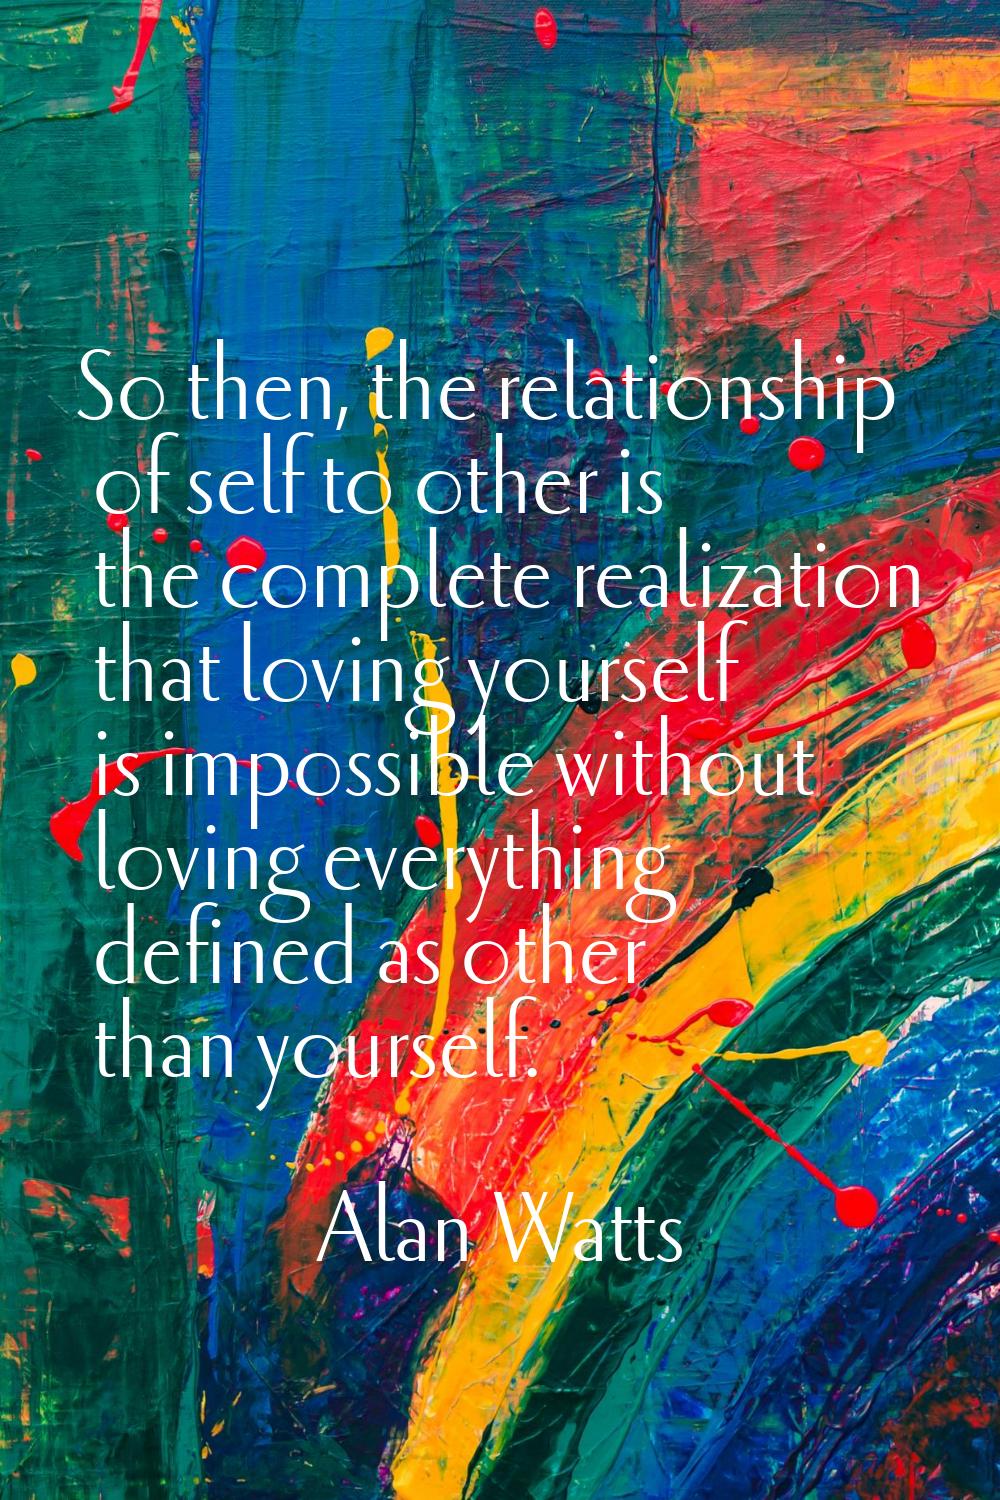 So then, the relationship of self to other is the complete realization that loving yourself is impo